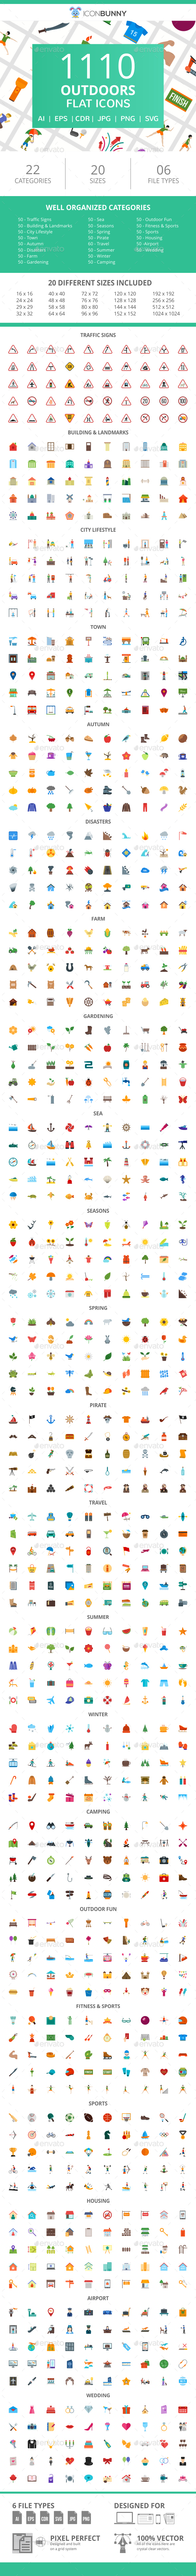 1396 Professions & Services Flat Icons